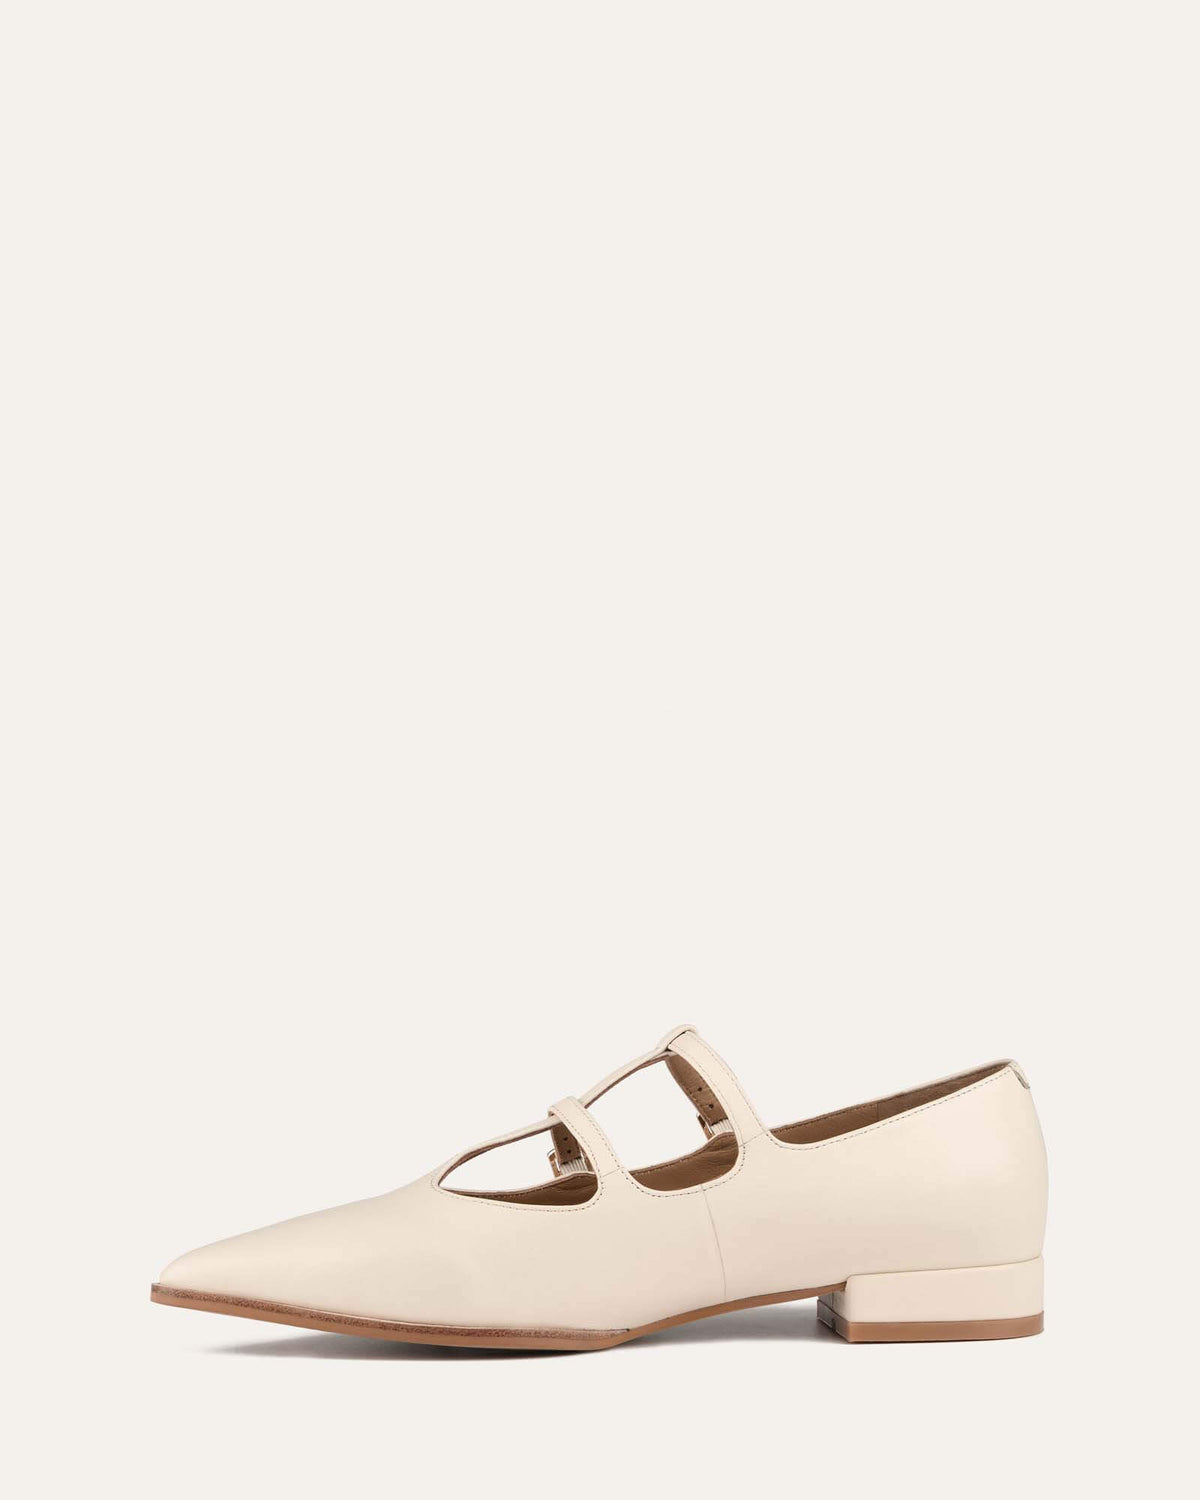 CANDICE DRESS FLATS OFF WHITE LEATHER